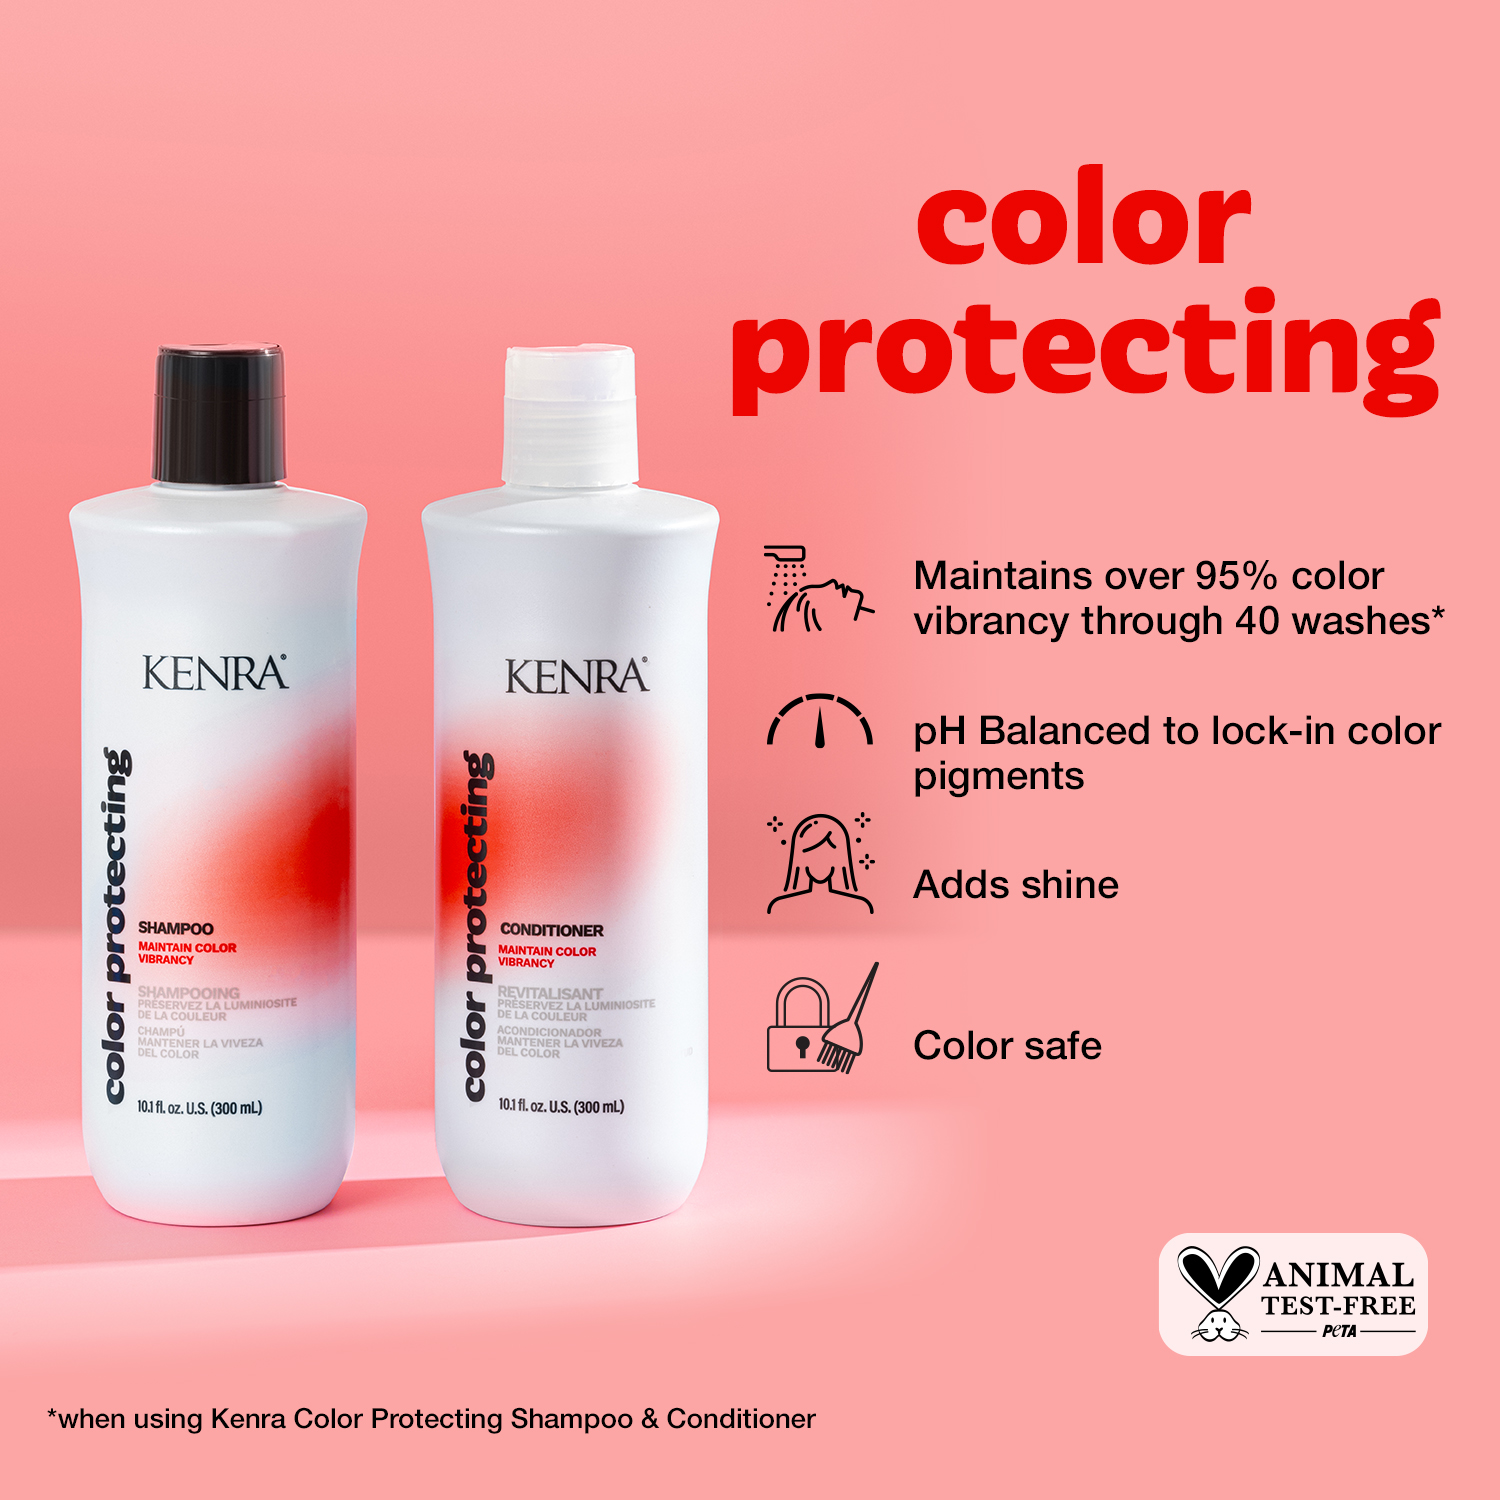 ColorProtecting SC Kenra Infographic